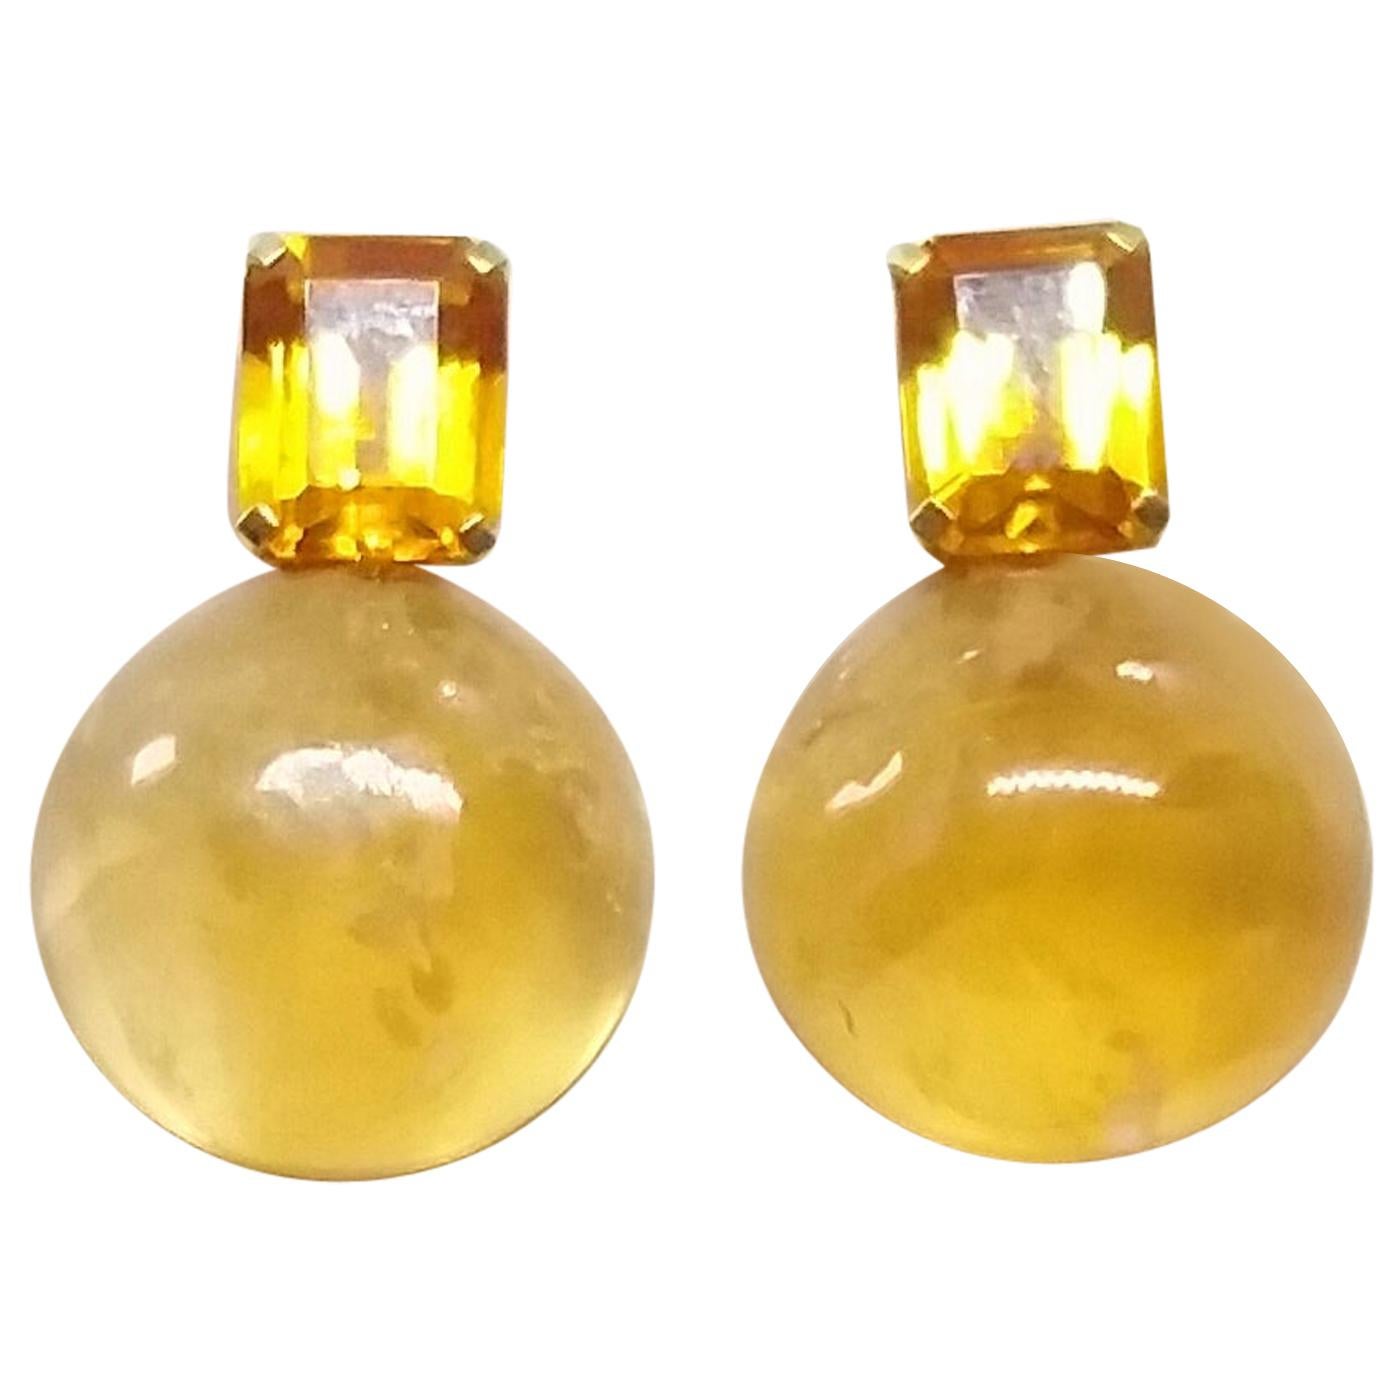 Octagon Cut Faceted Cognac Citrine Golden Citrine Button 14 Kt Solid Yellow Gold For Sale